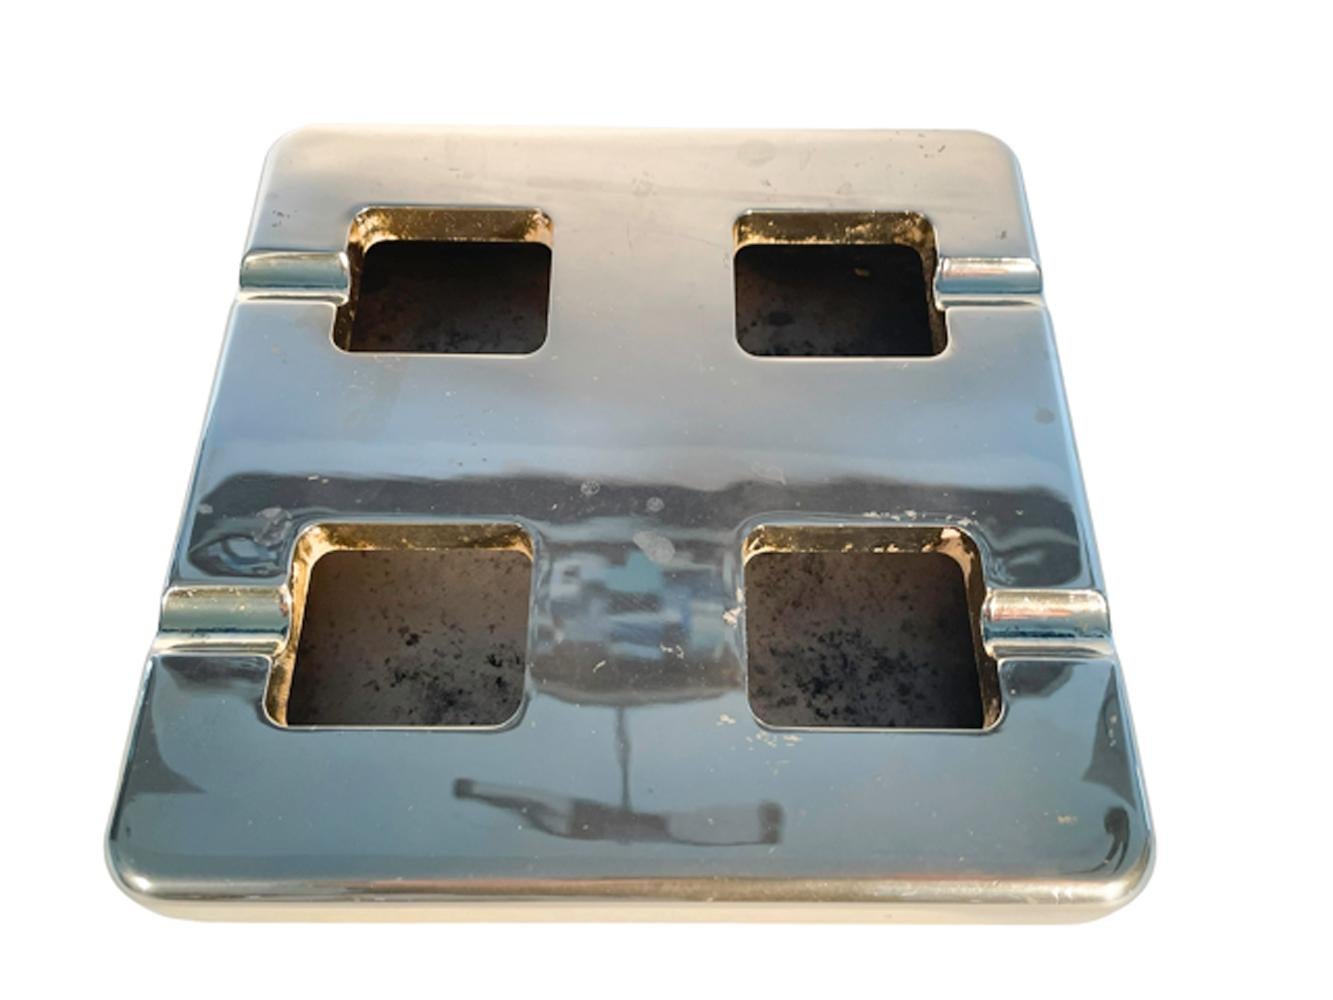 Two-part brass ashtray of box for, the shallow square base with a conforming top fitting over the rim and with four square holes, each with one cigarette rest facing to two of the four sides and creating a clean, minimalist design.